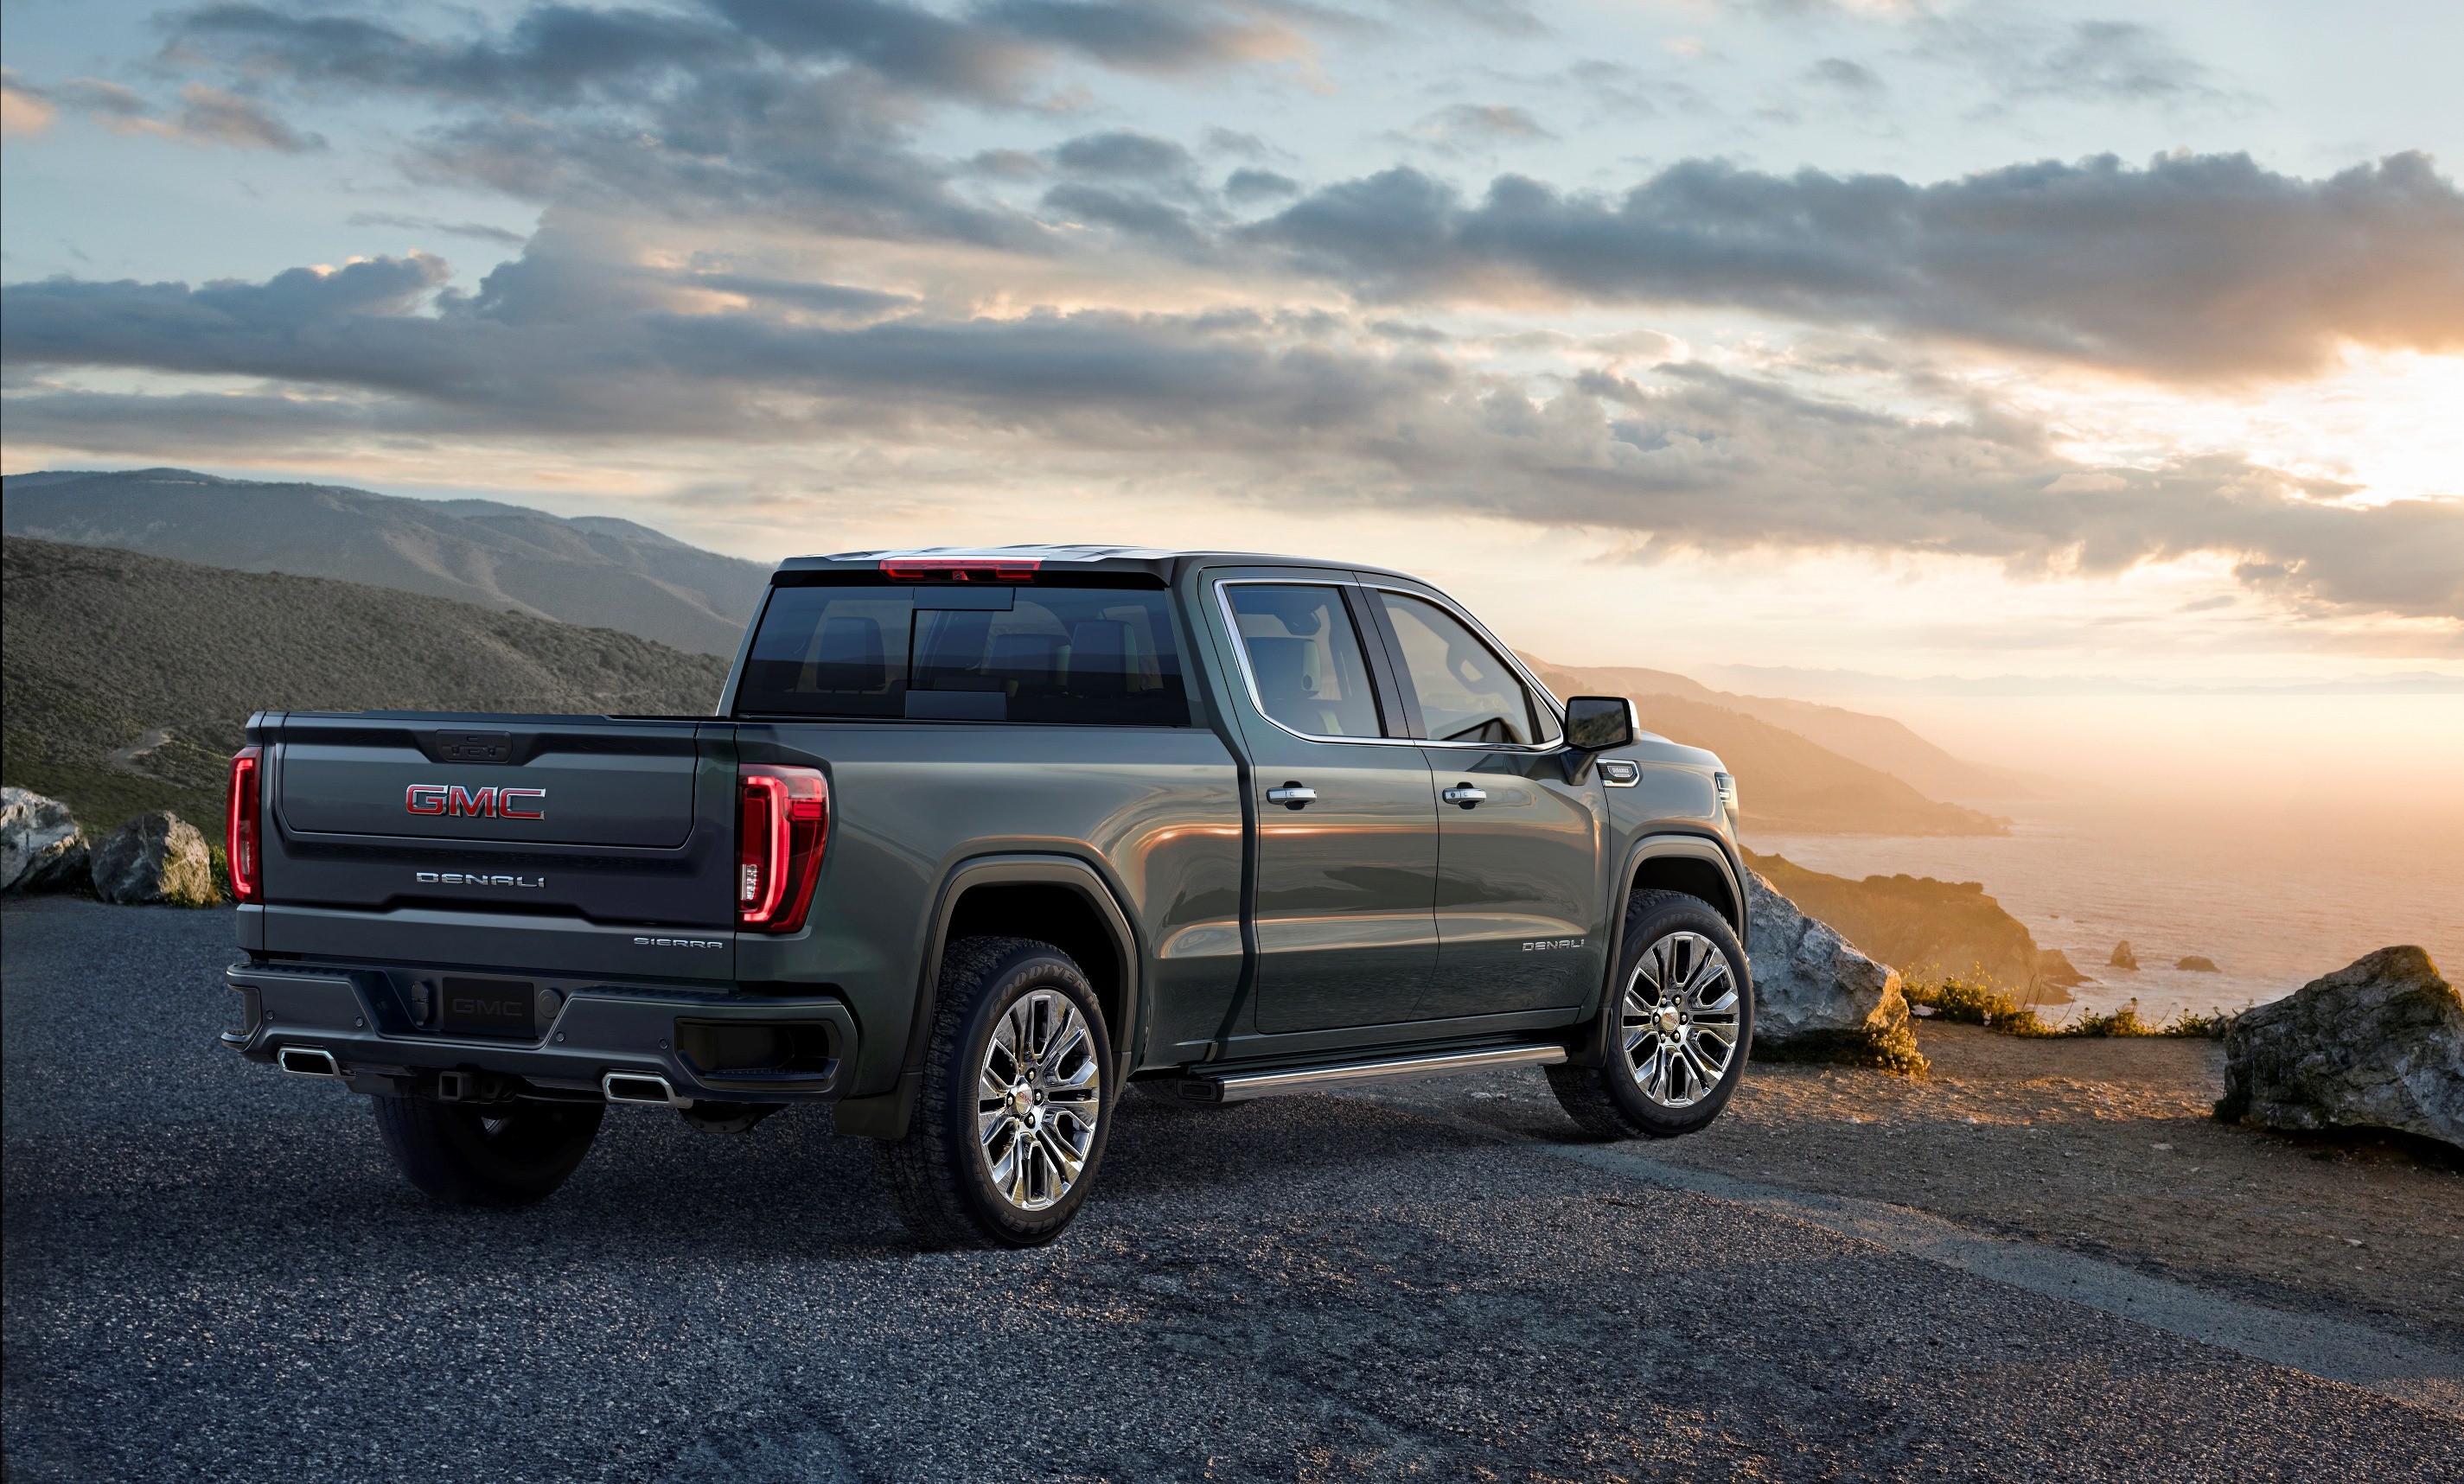 2019 Gmc Sierra 1500 Elevation Comes Standard With Turbo Engine